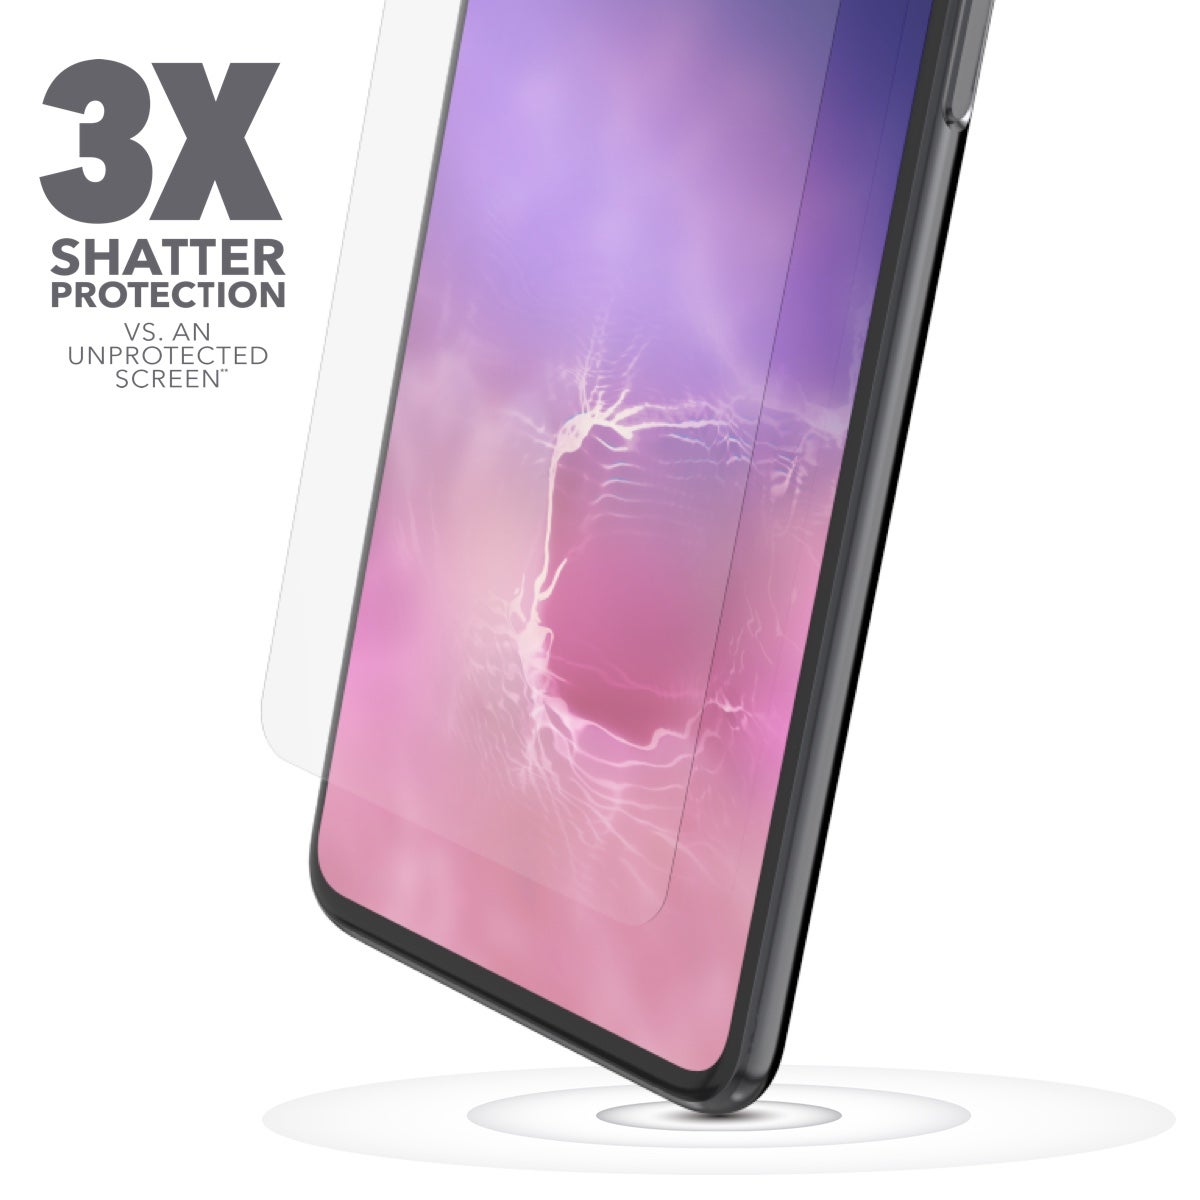 Powerful Impact Protection 
||This powerful tempered glass features 3X the shatter protection of an ordinary screen, and the reinforced edges prevent chips and cracks.